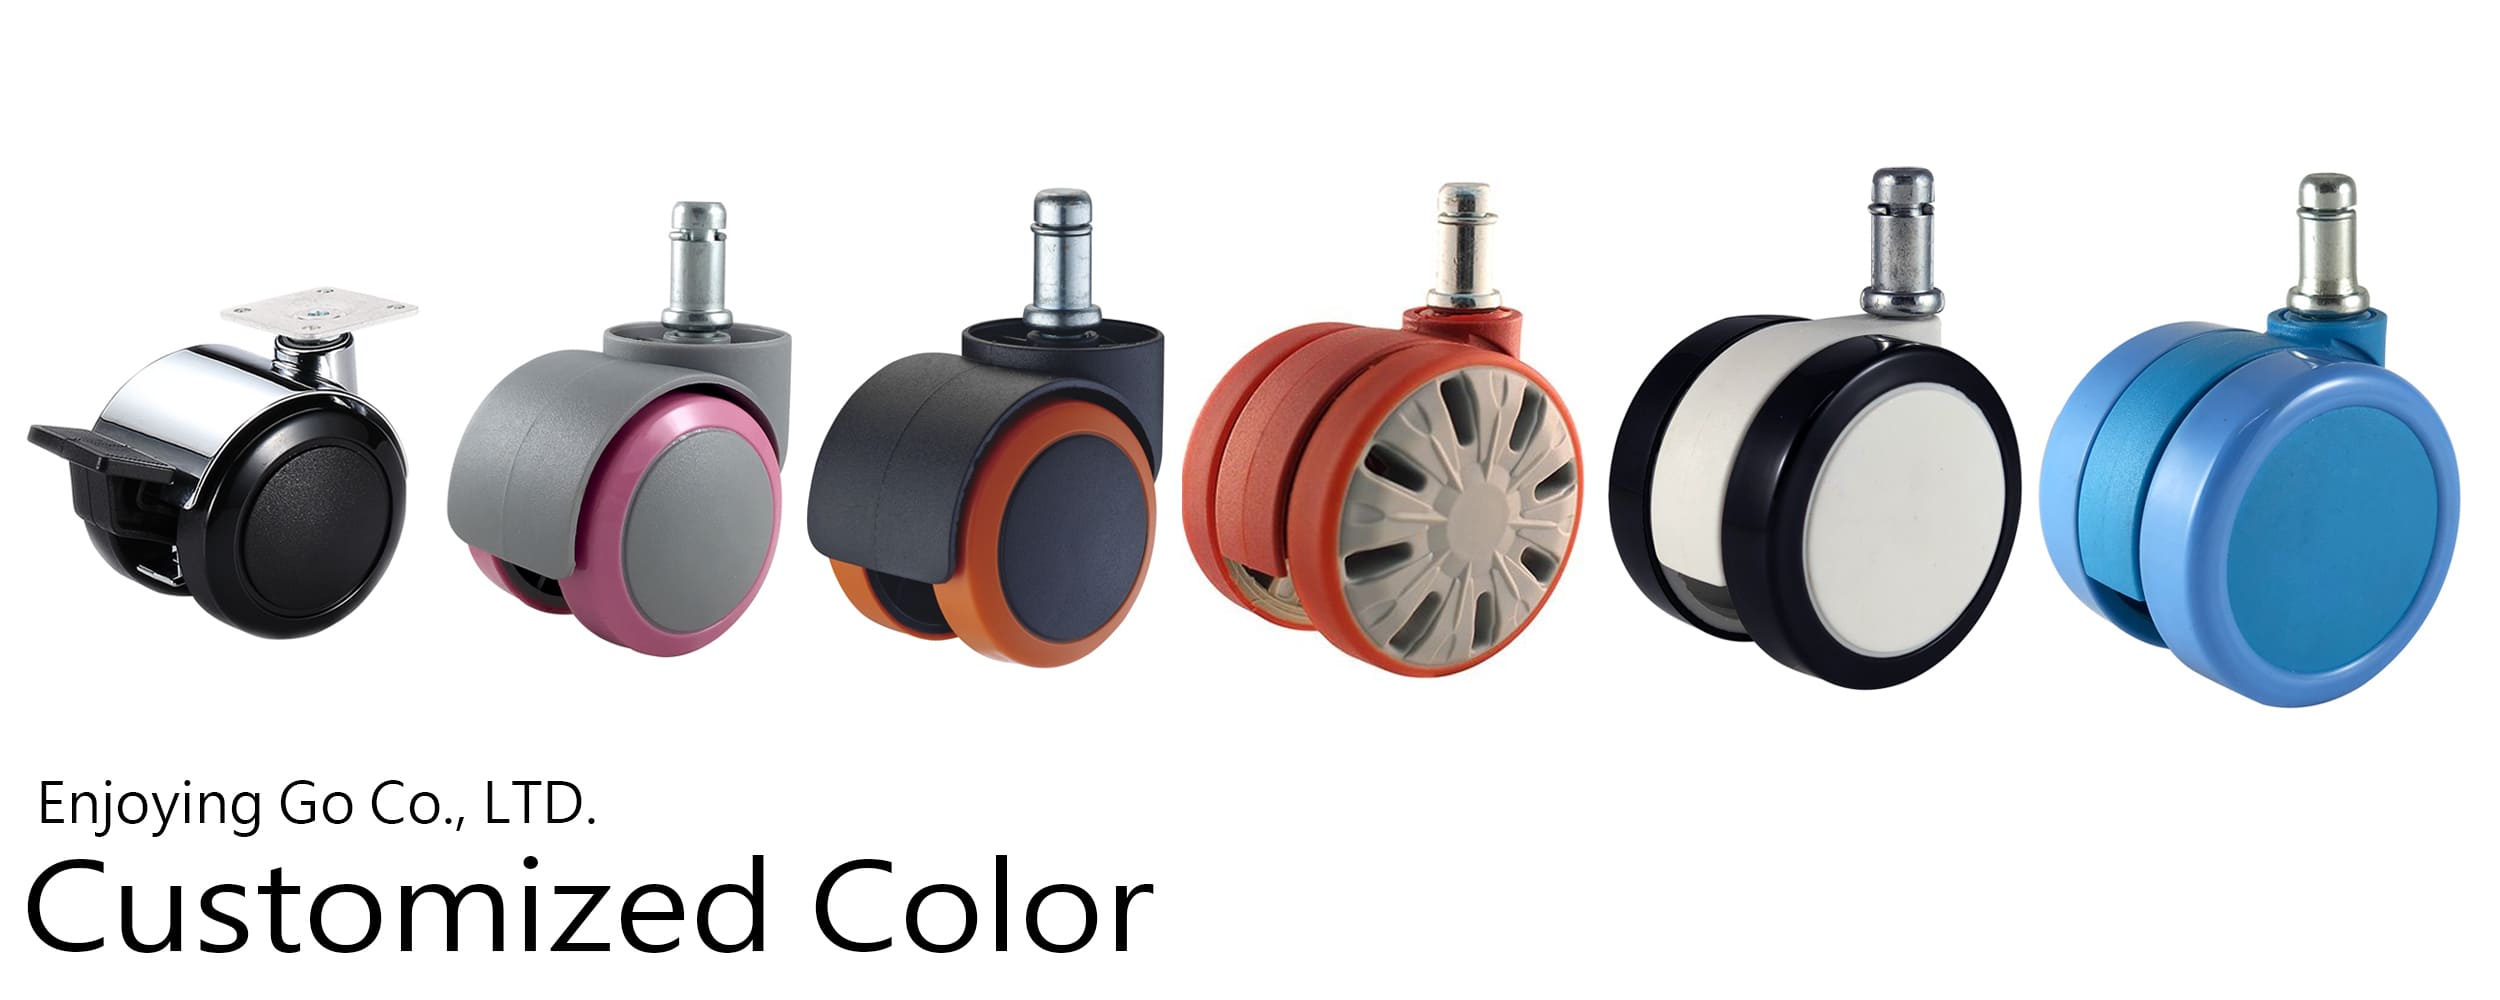 Caster Color customized: Everything you need to know about it.